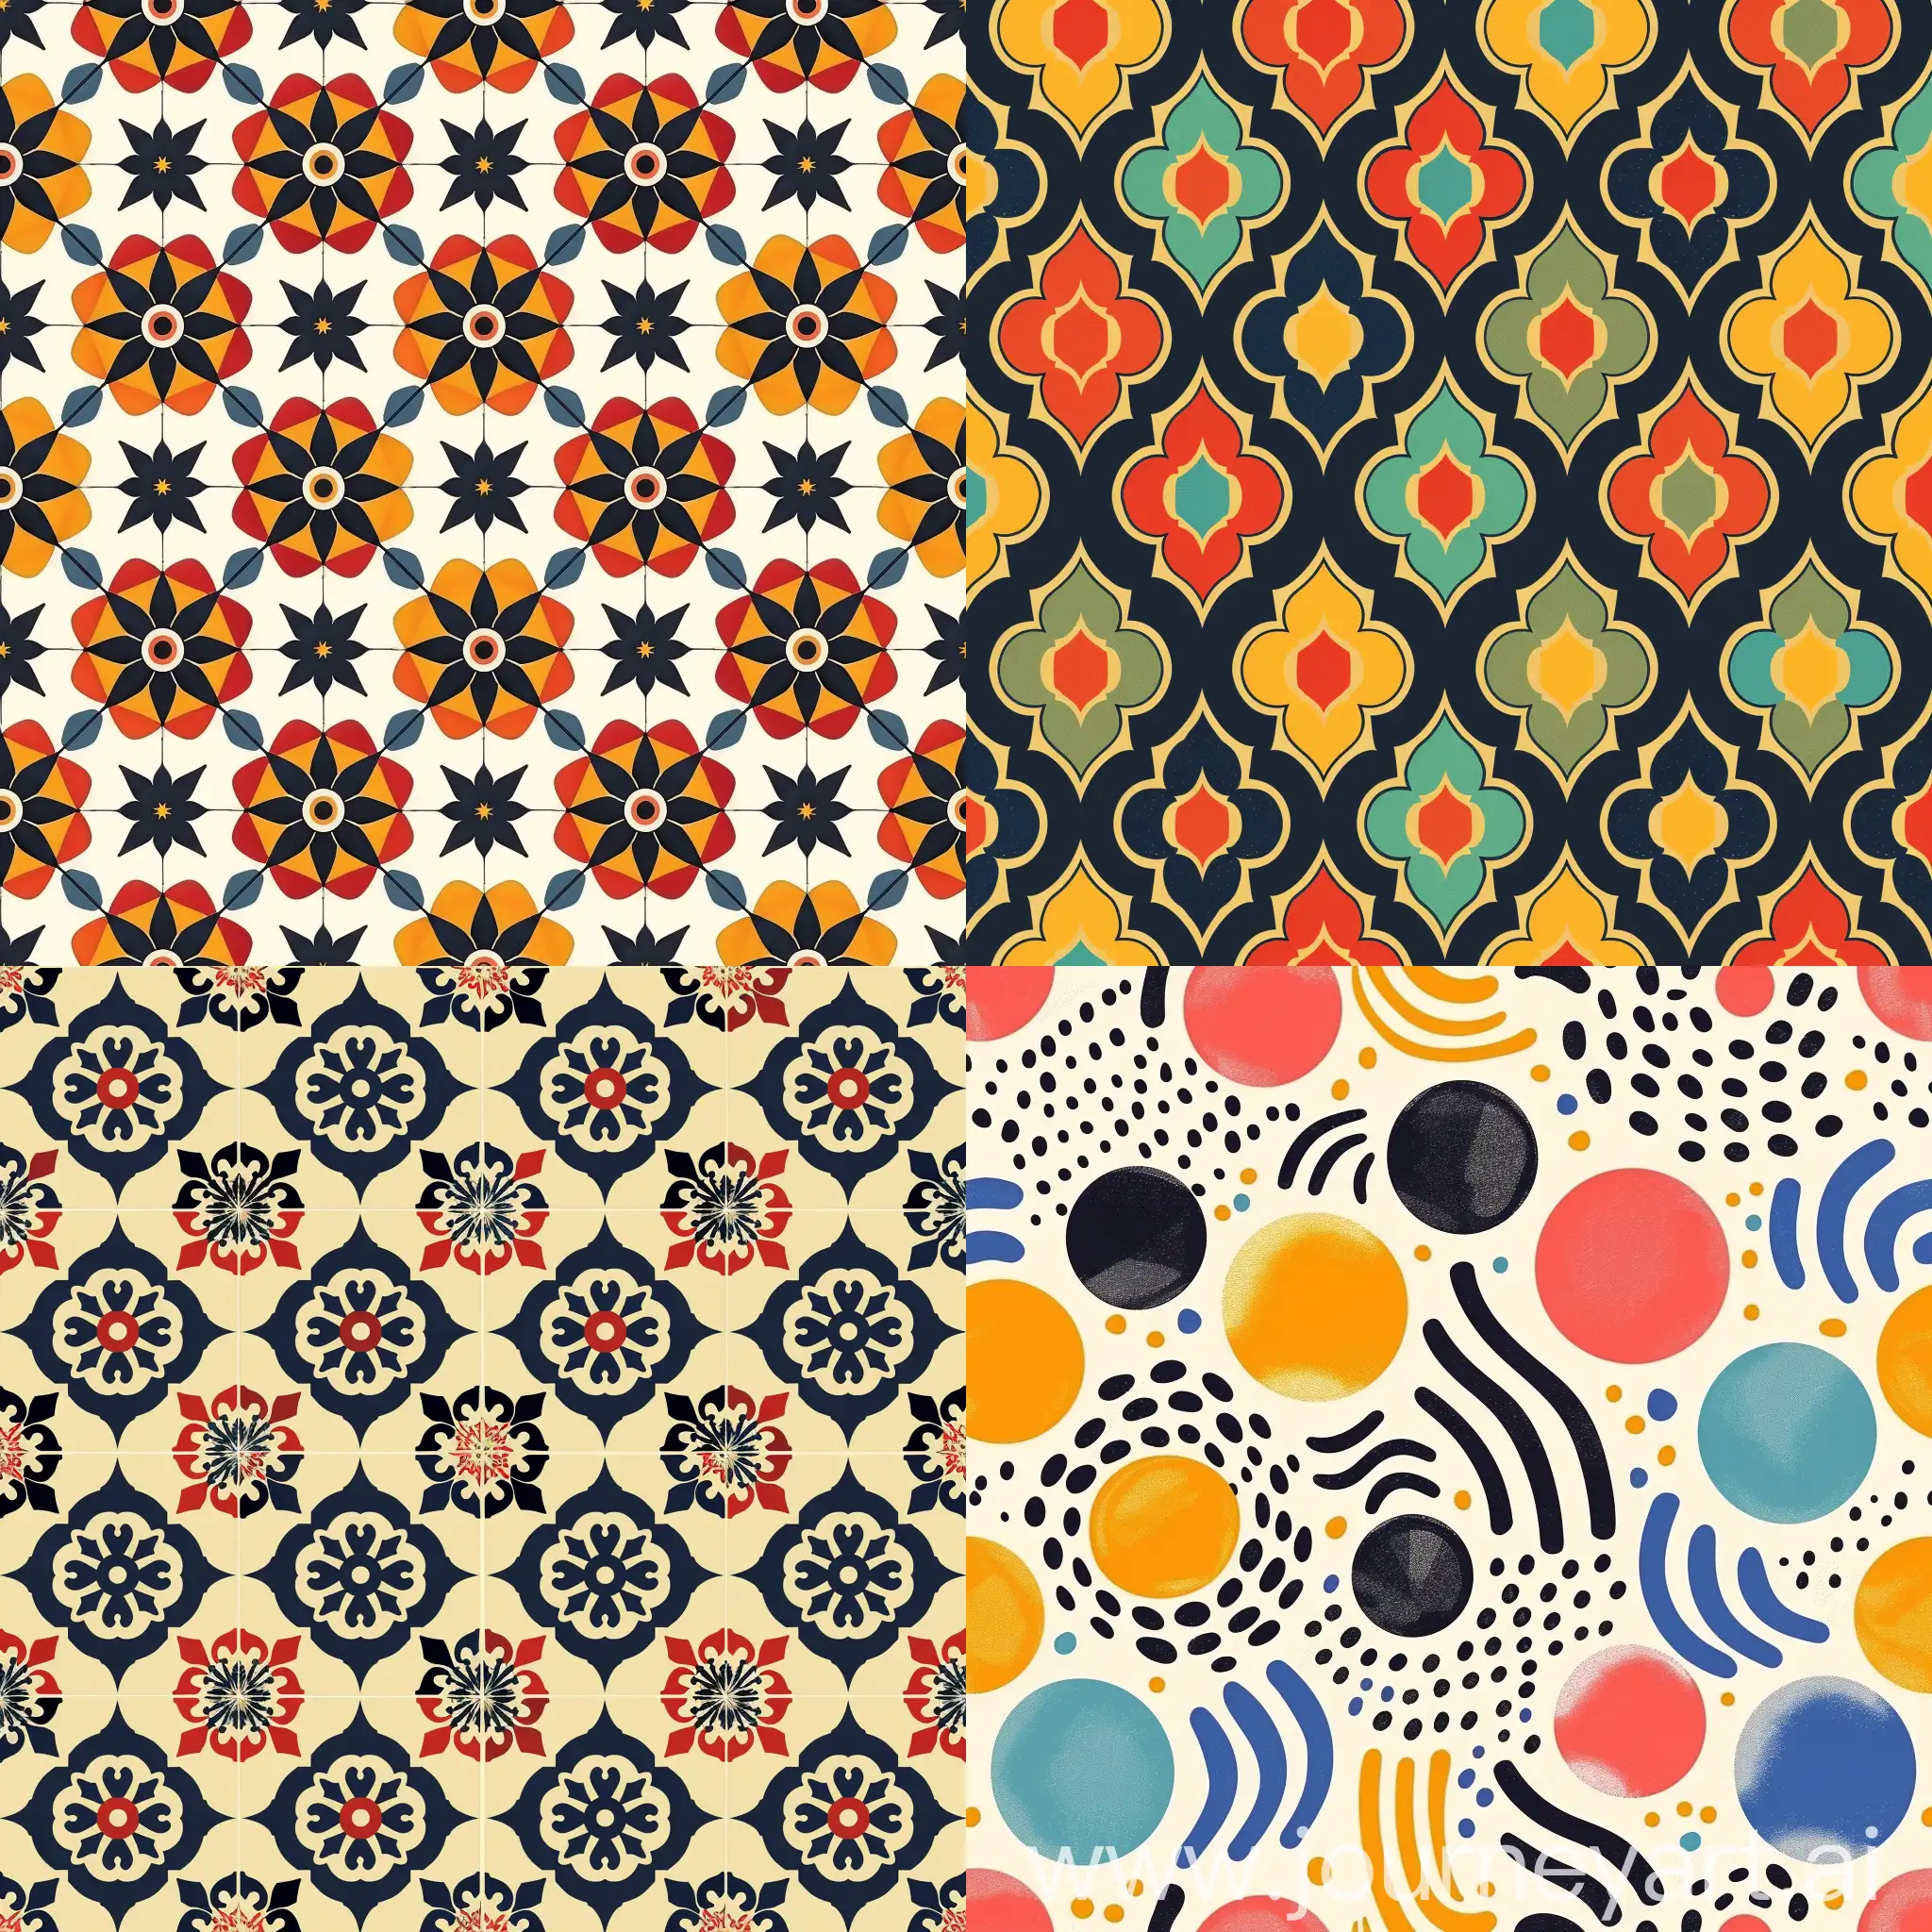 Abstract-Geometric-Patterns-in-Vibrant-Colors